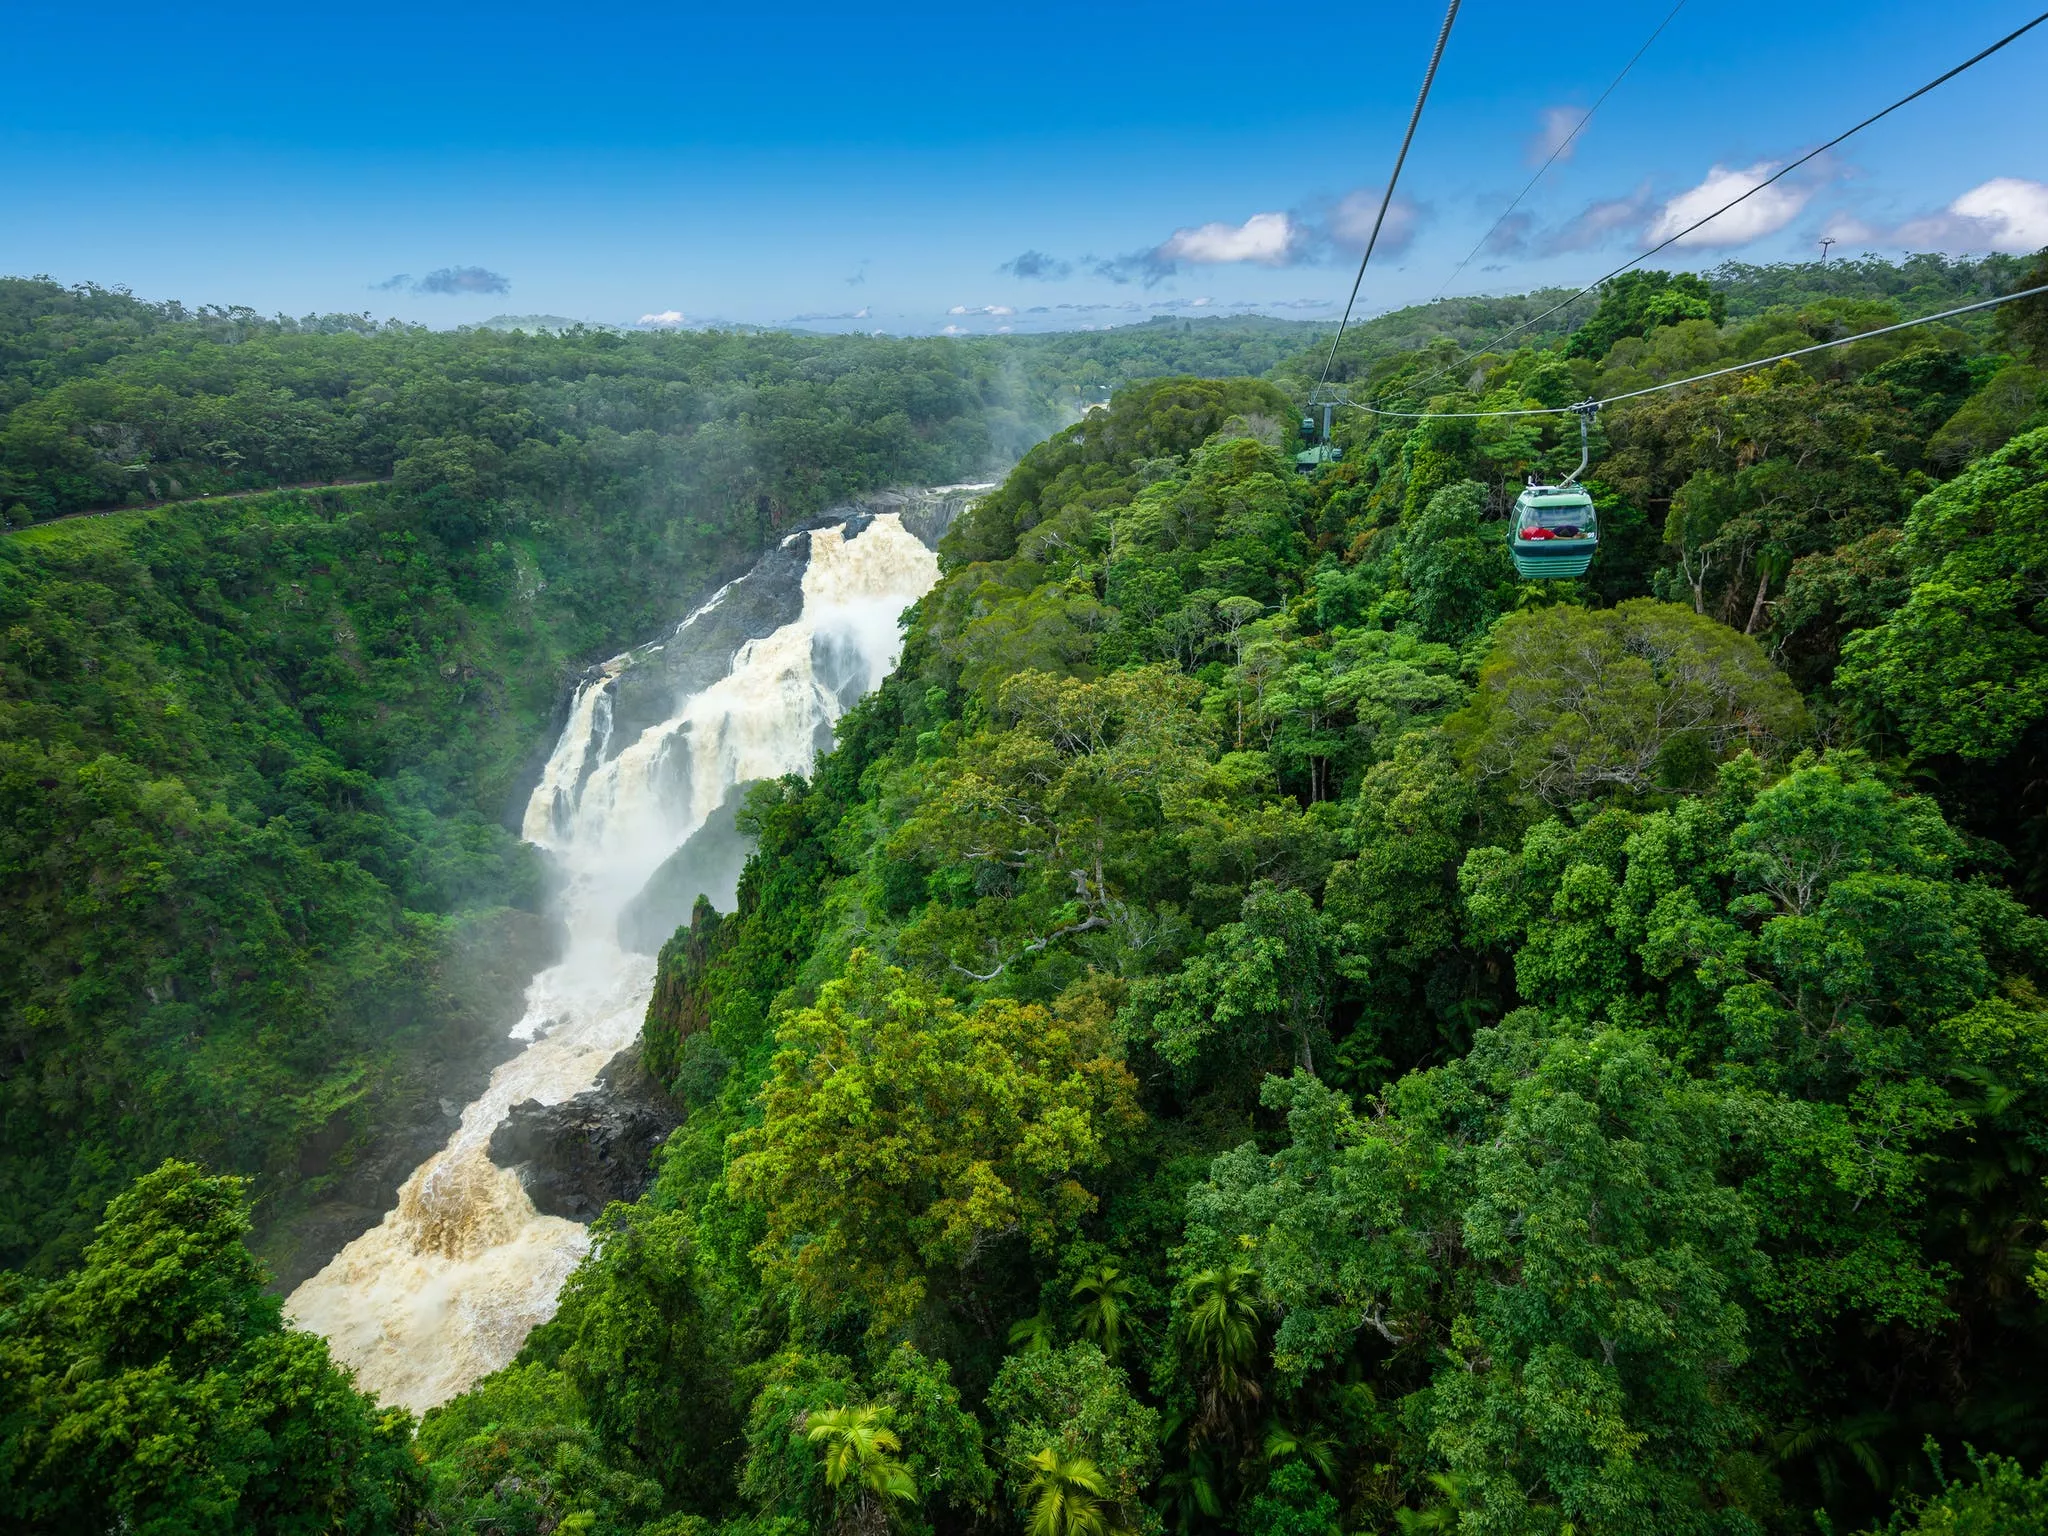 Skyrail Rainforest Cableway in Australia, Australia and Oceania | Cable Cars - Rated 4.5